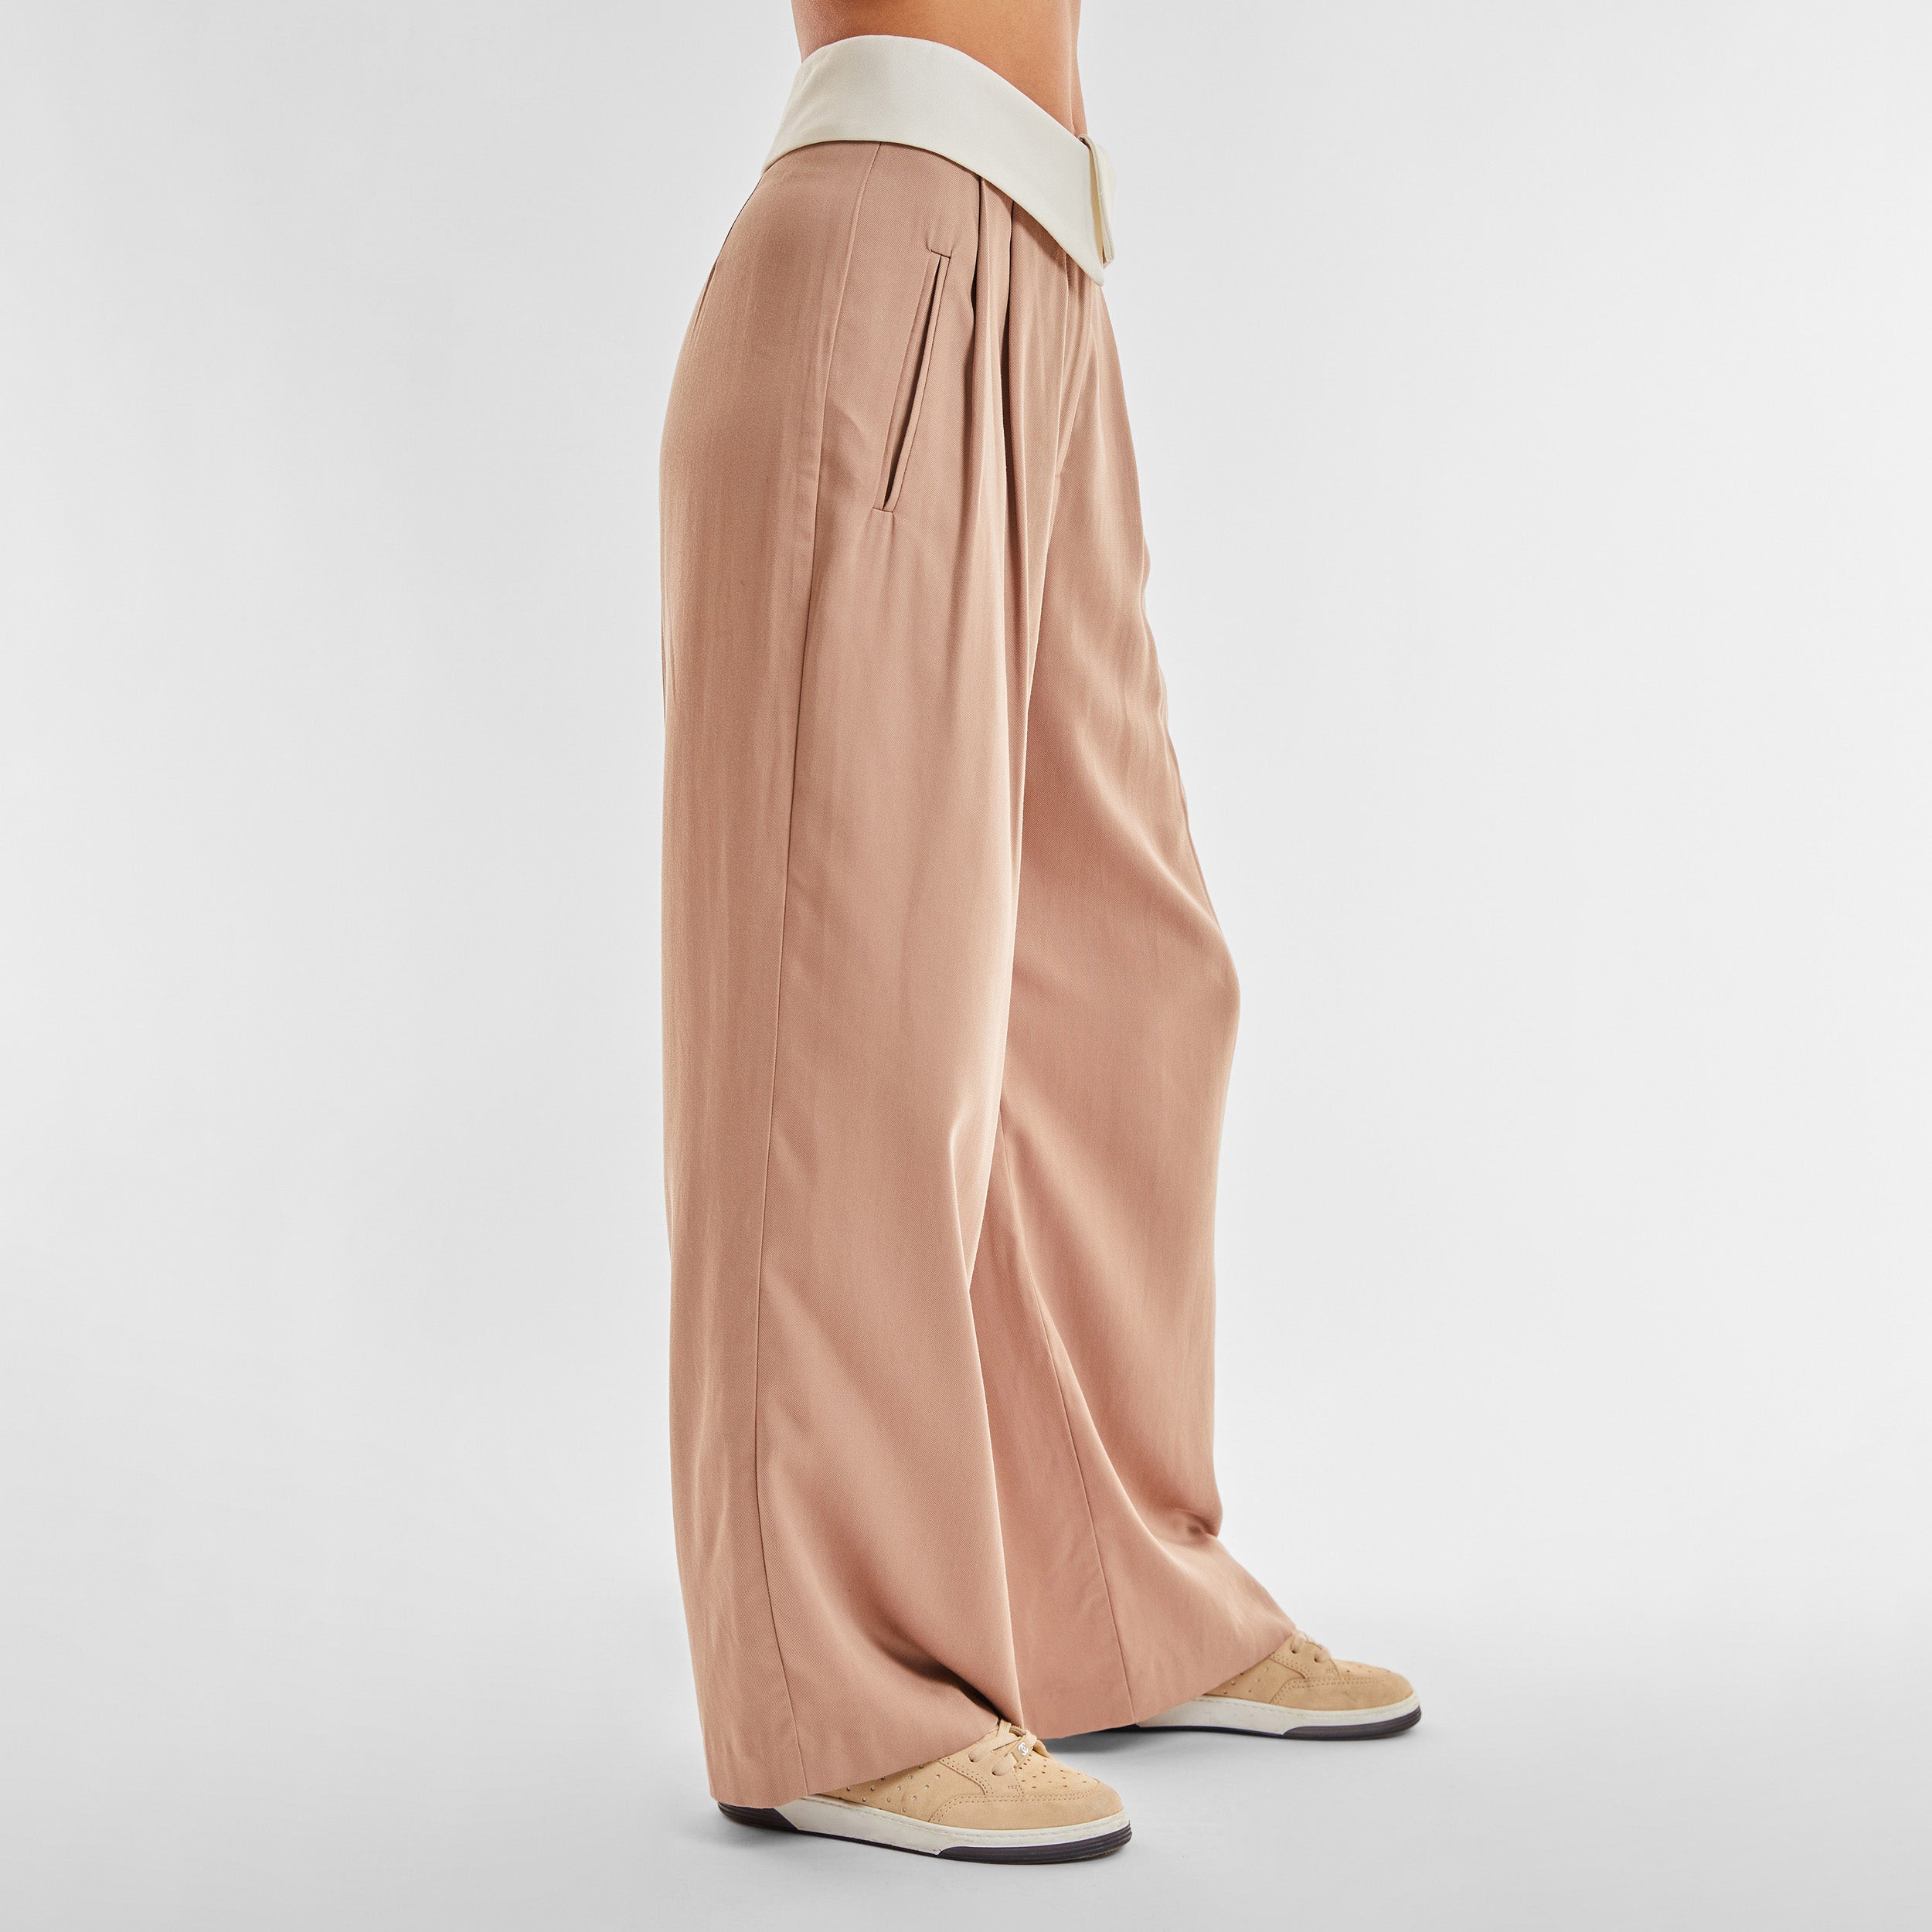 Side view of woman wearing light brown trousers with white foldover waistband detail.